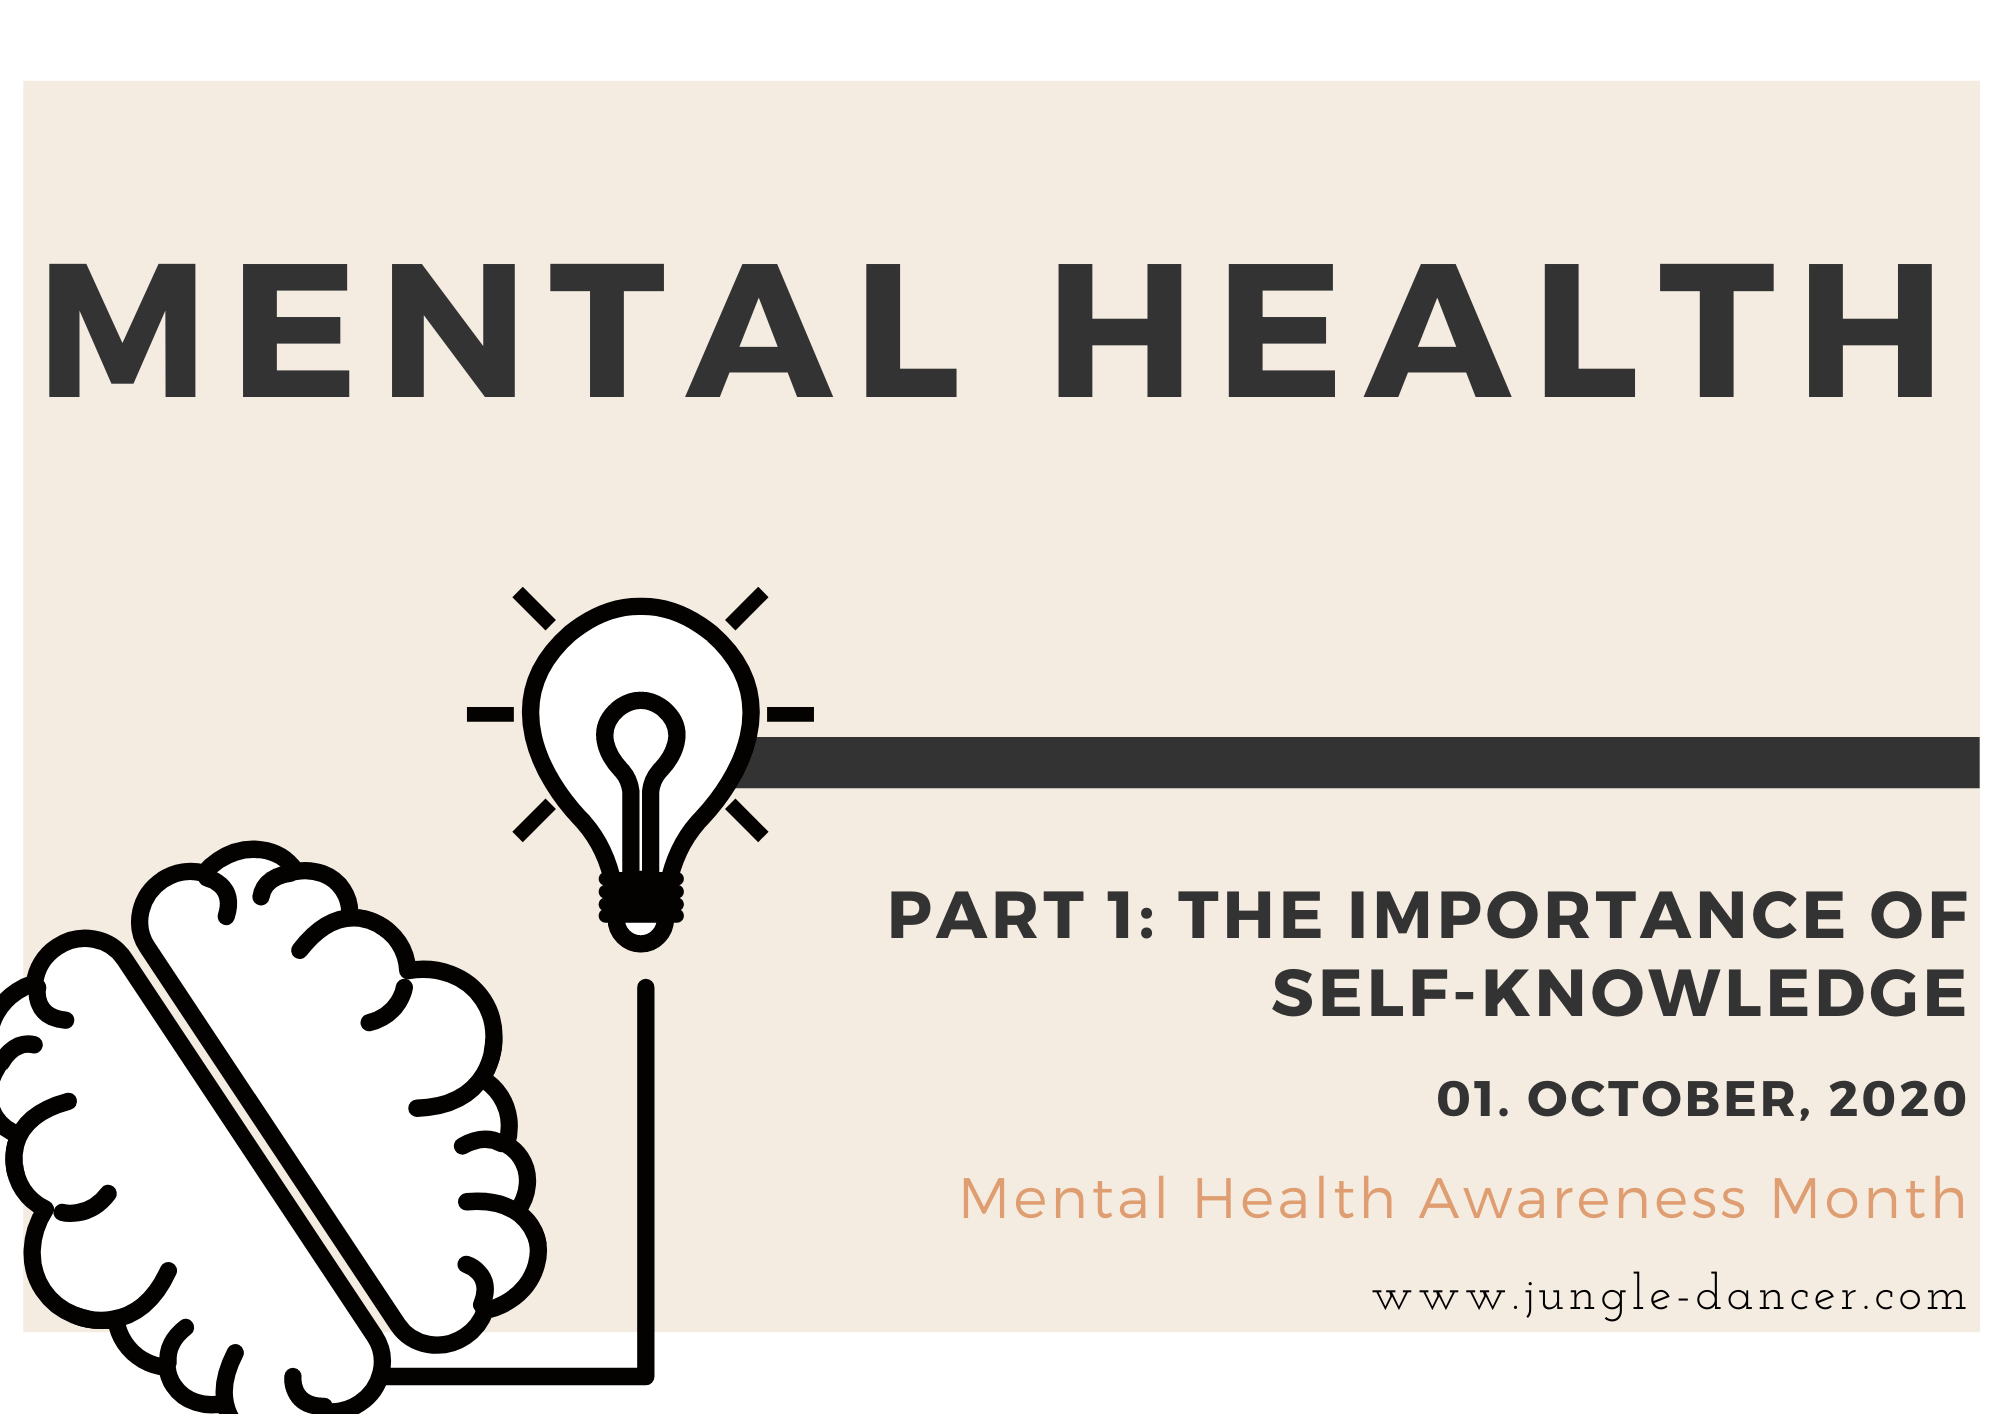 The Importance of Mental Health